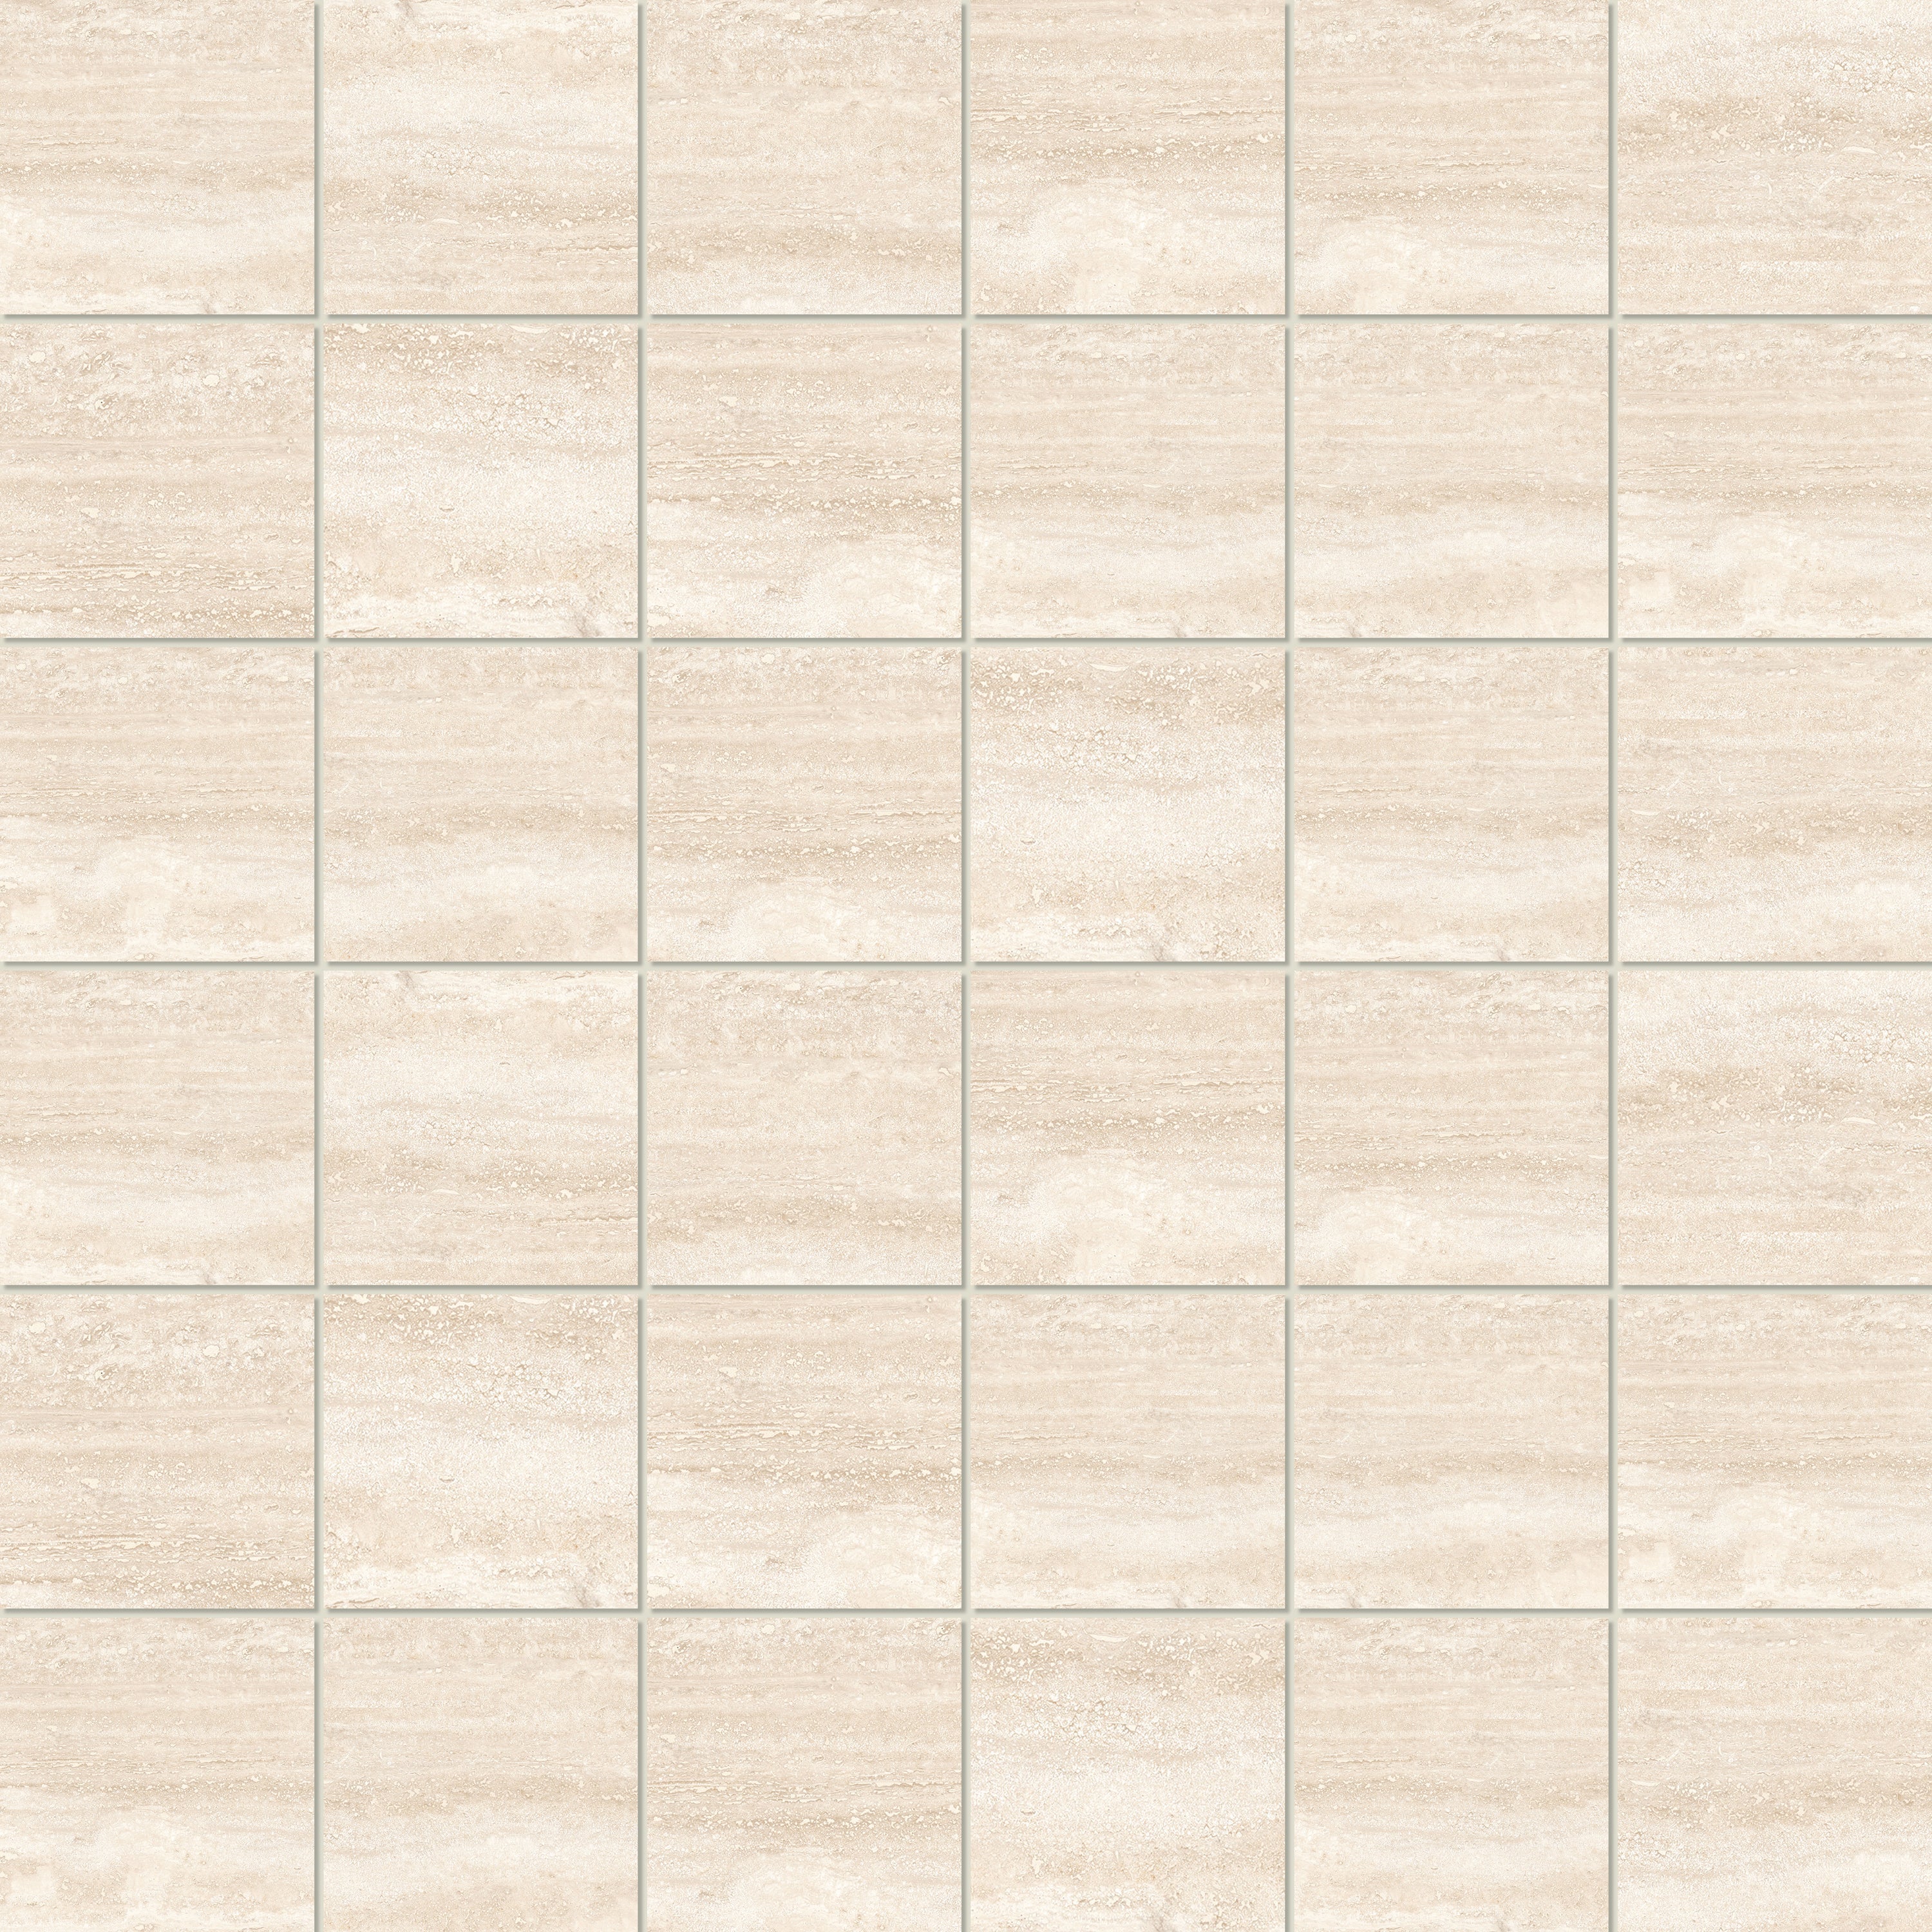 landmark contract pisa beige straight stack 2x2 mosaic 12x12x8mm matte pressed porcelain tile distributed by surface group international